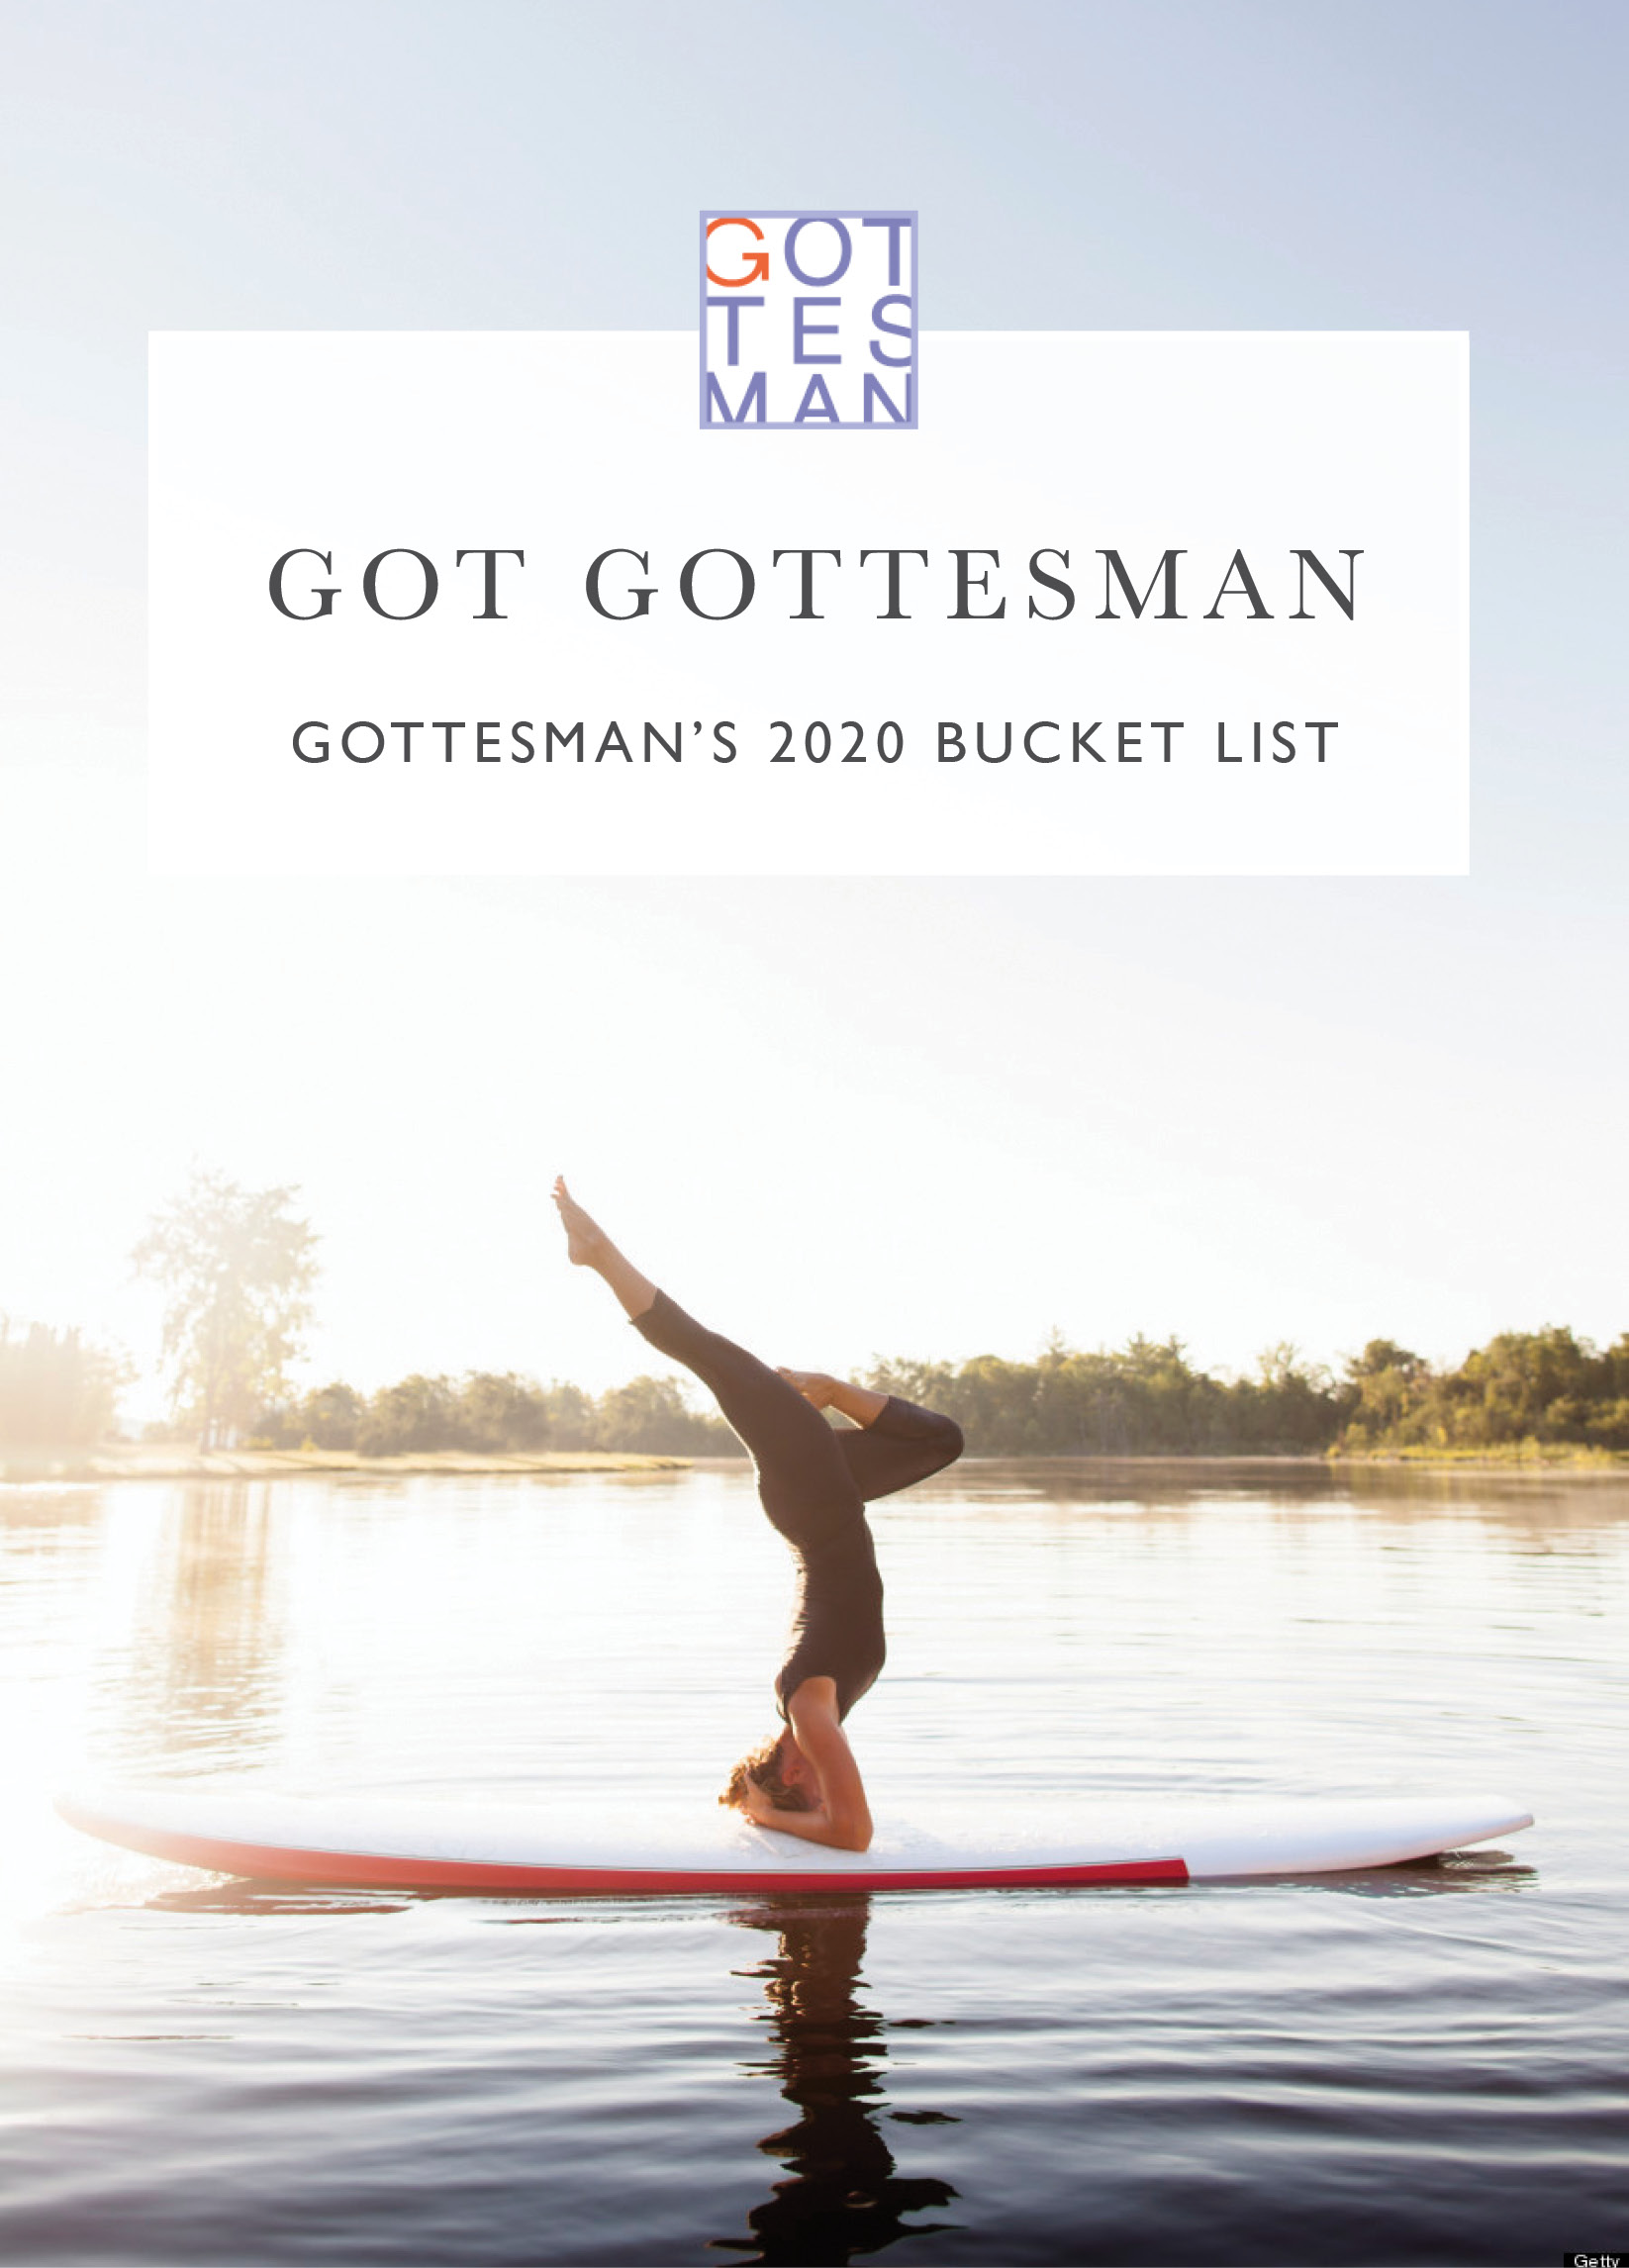 Person doing yoga on a paddle board with text overlay, "Got Gottesman: Gottesman's 2020 Bucket List"